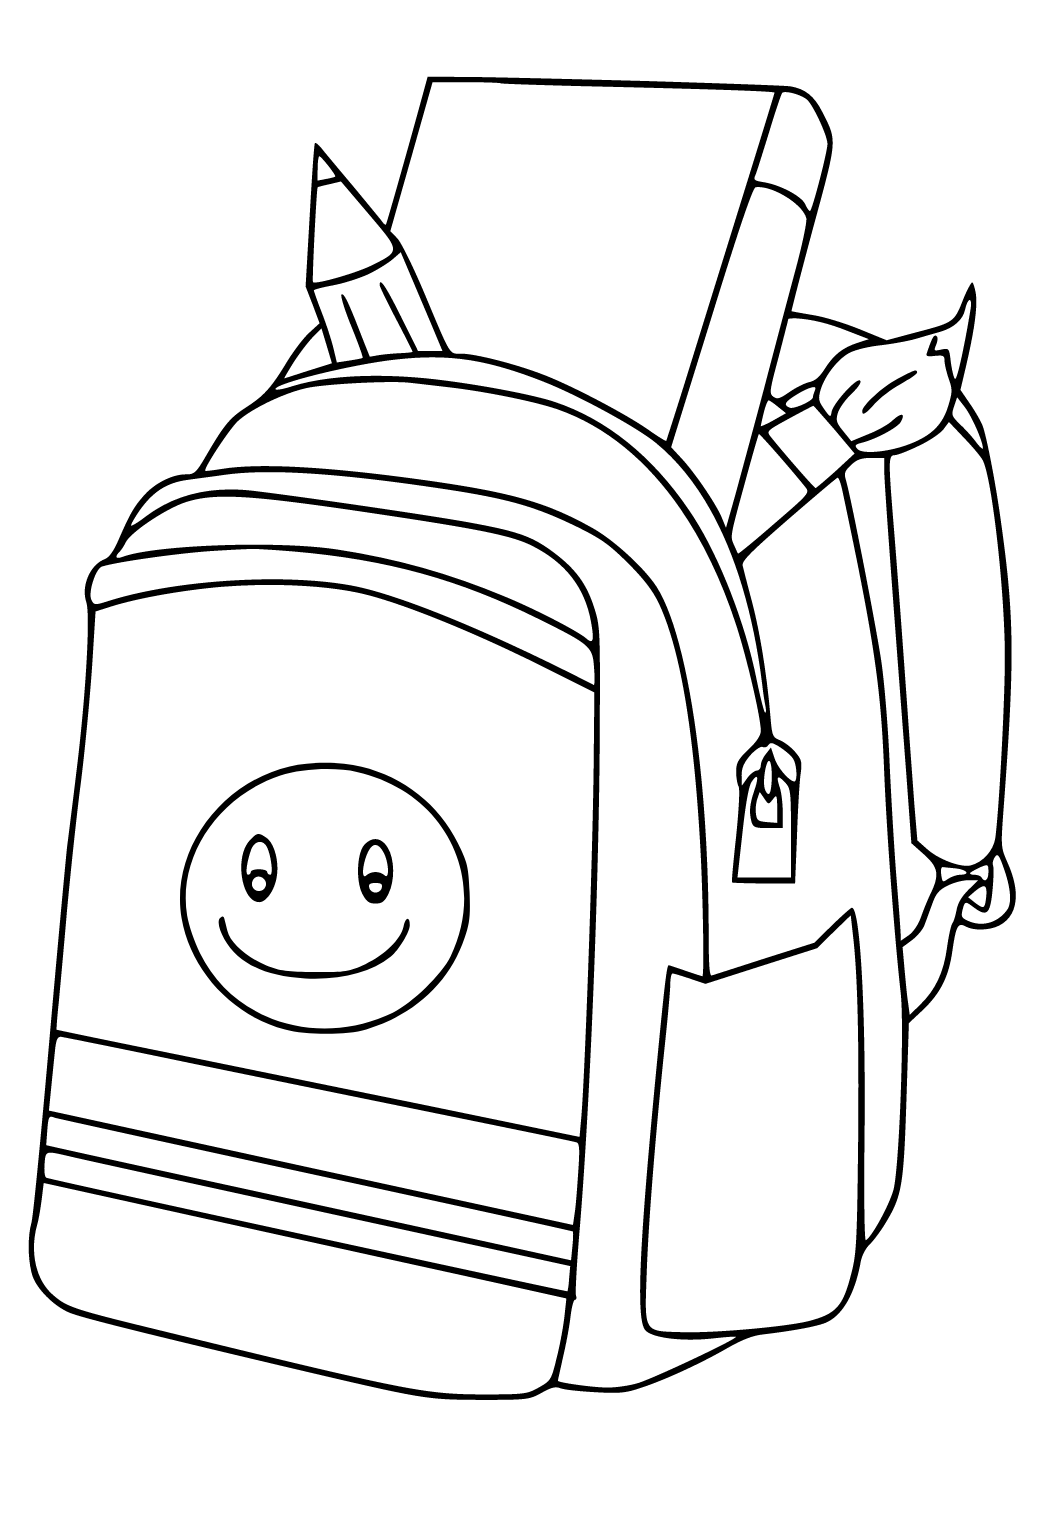 Backpack with school supplies coloring book Vector Image